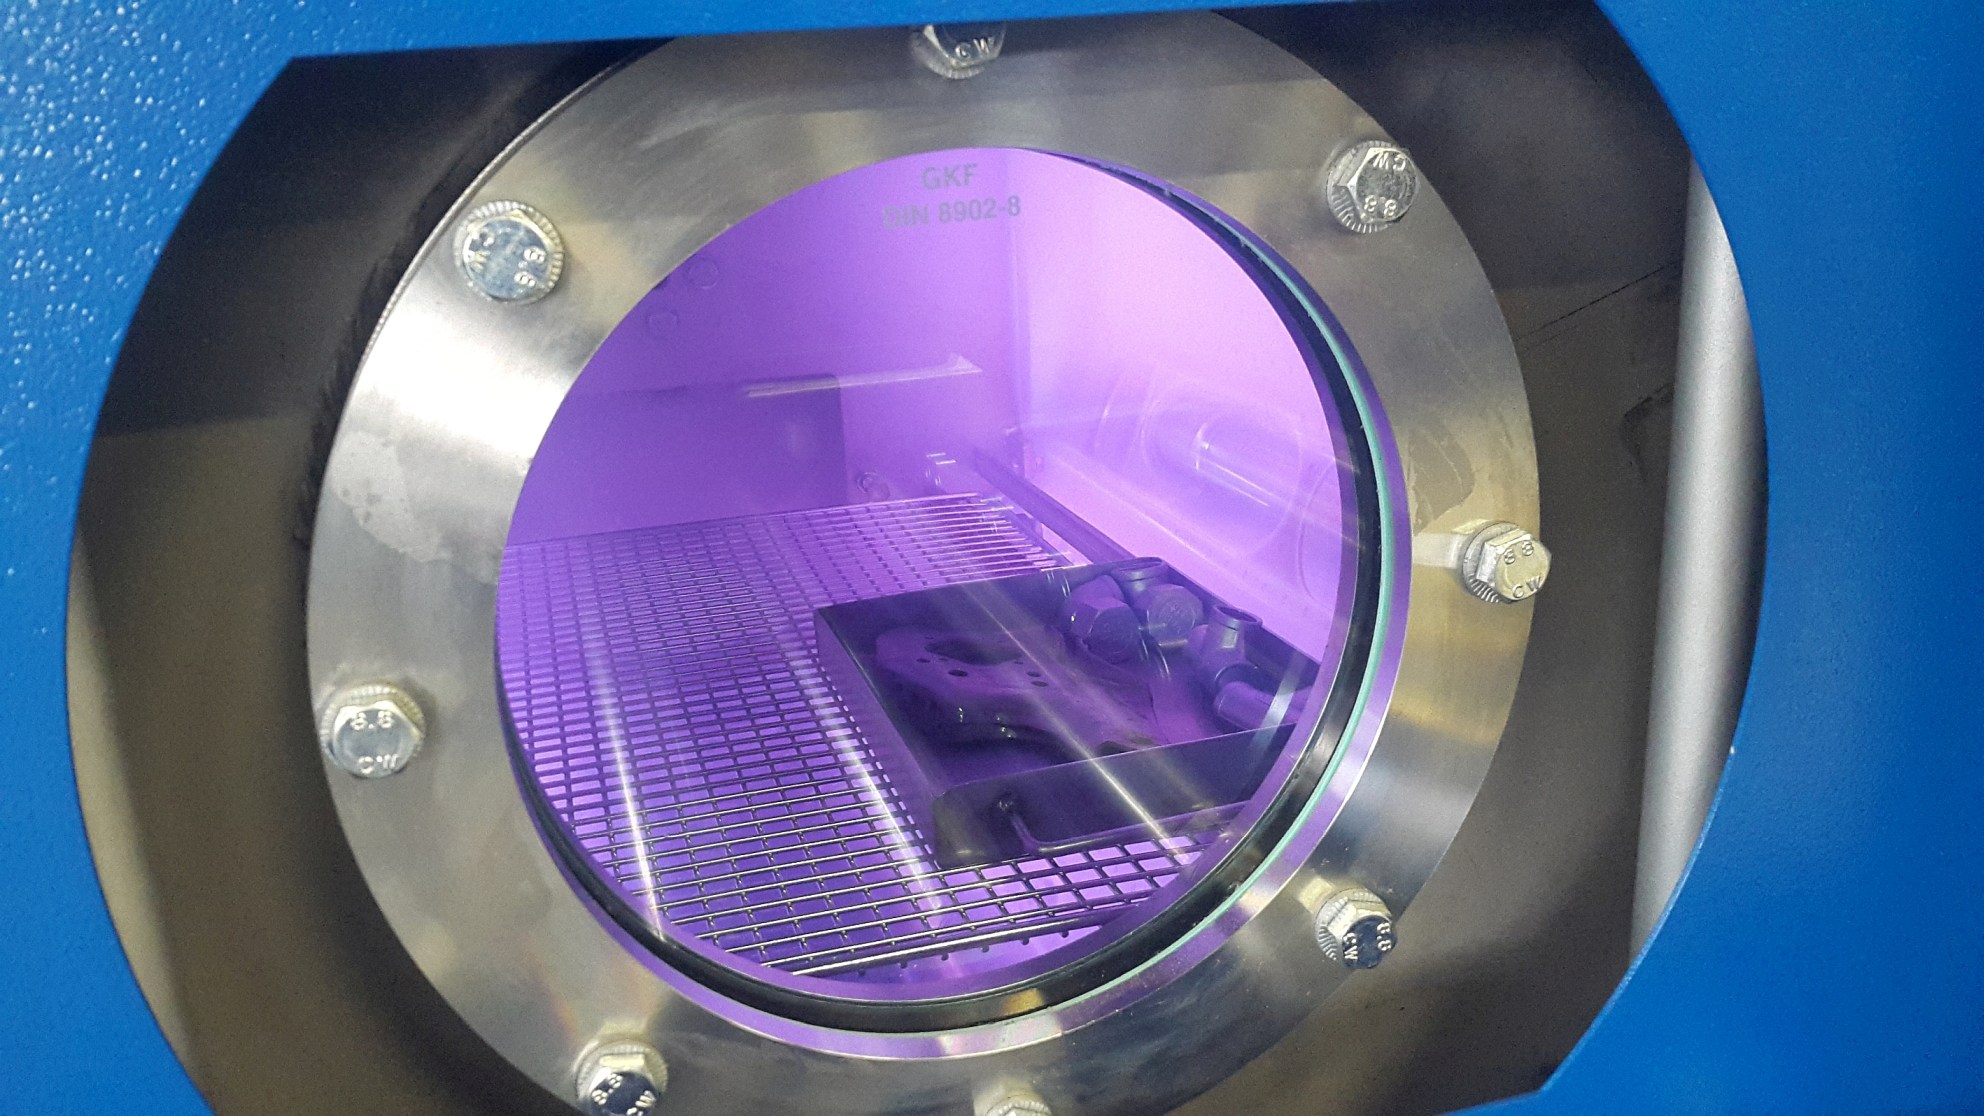 By combining wet chemical and low-pressure plasma cleaning methods for ultrafine degreasing in a single machine, the surface characteristics required for downstream coating or bonding are efficiently achieved. Photo: Ecoclean